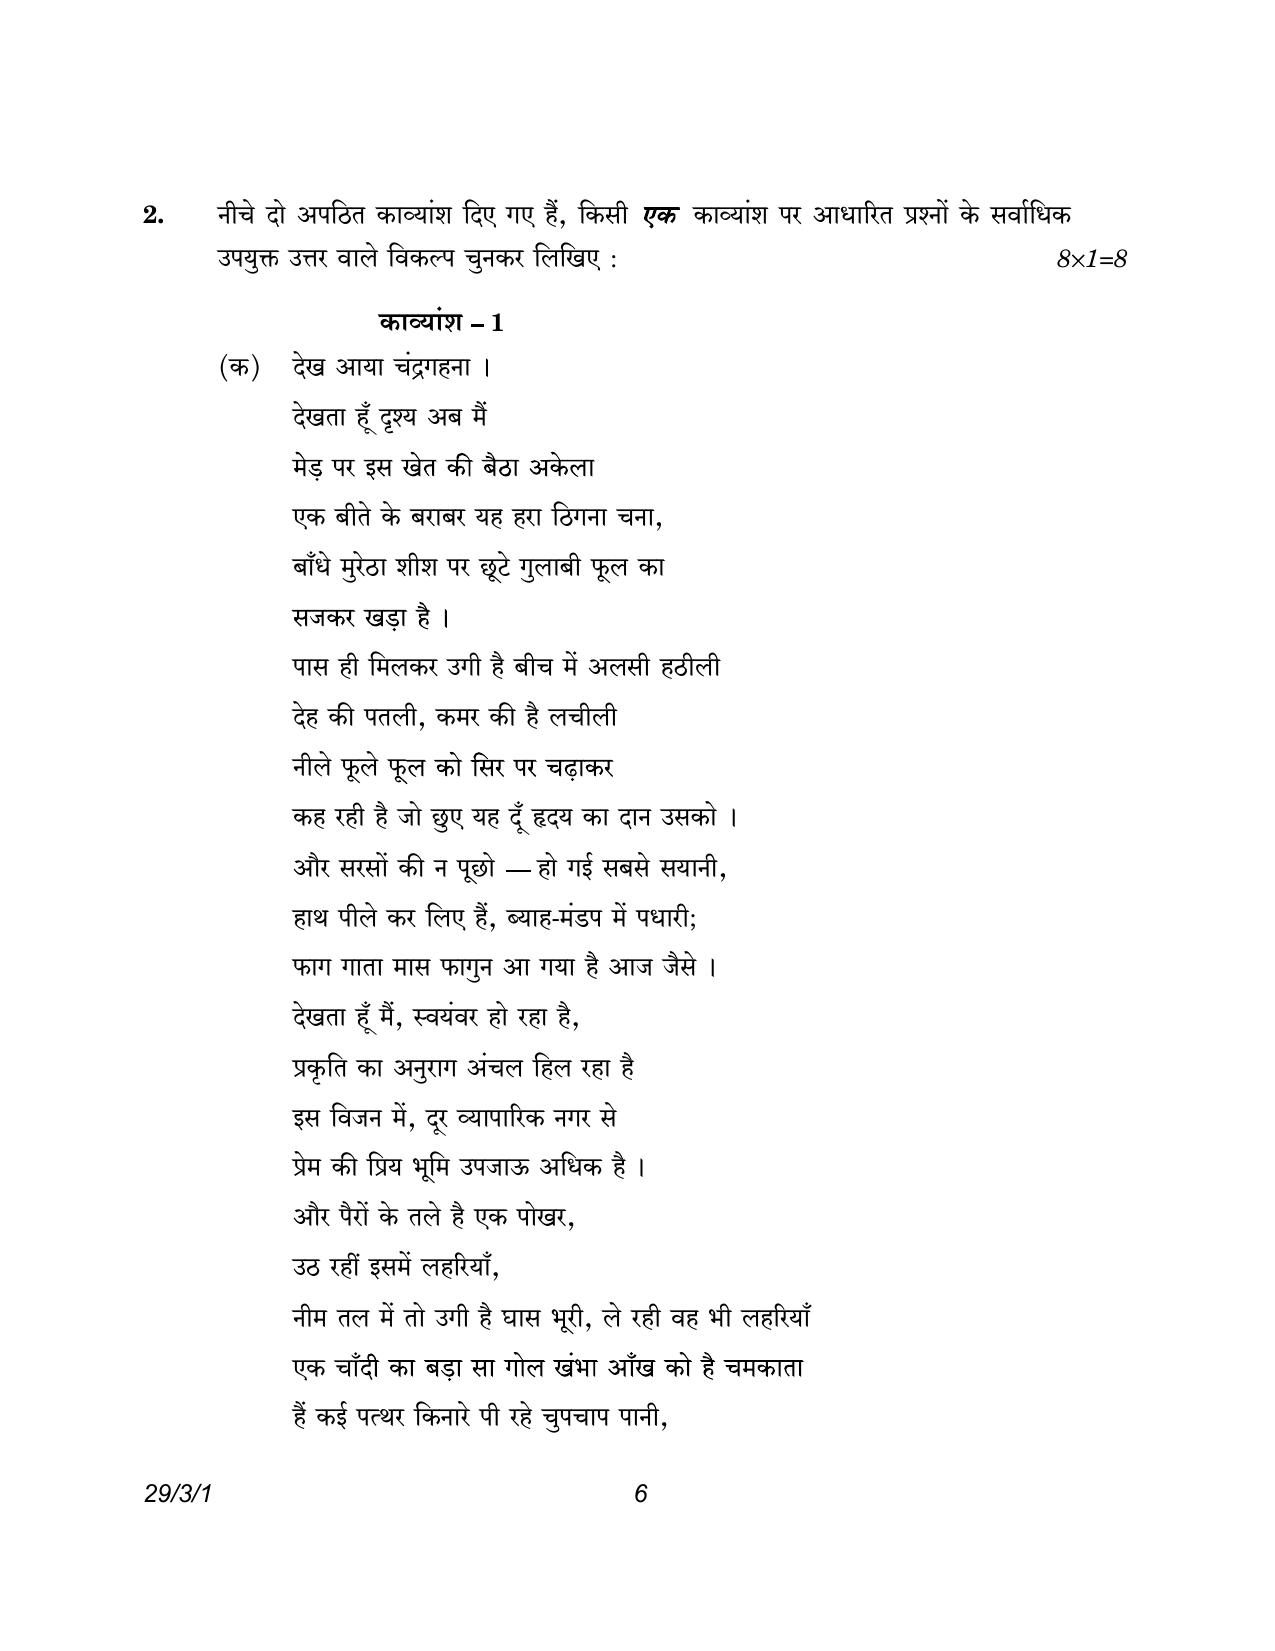 CBSE Class 12 29-3-1 Hindi Elective 2023 Question Paper - Page 6